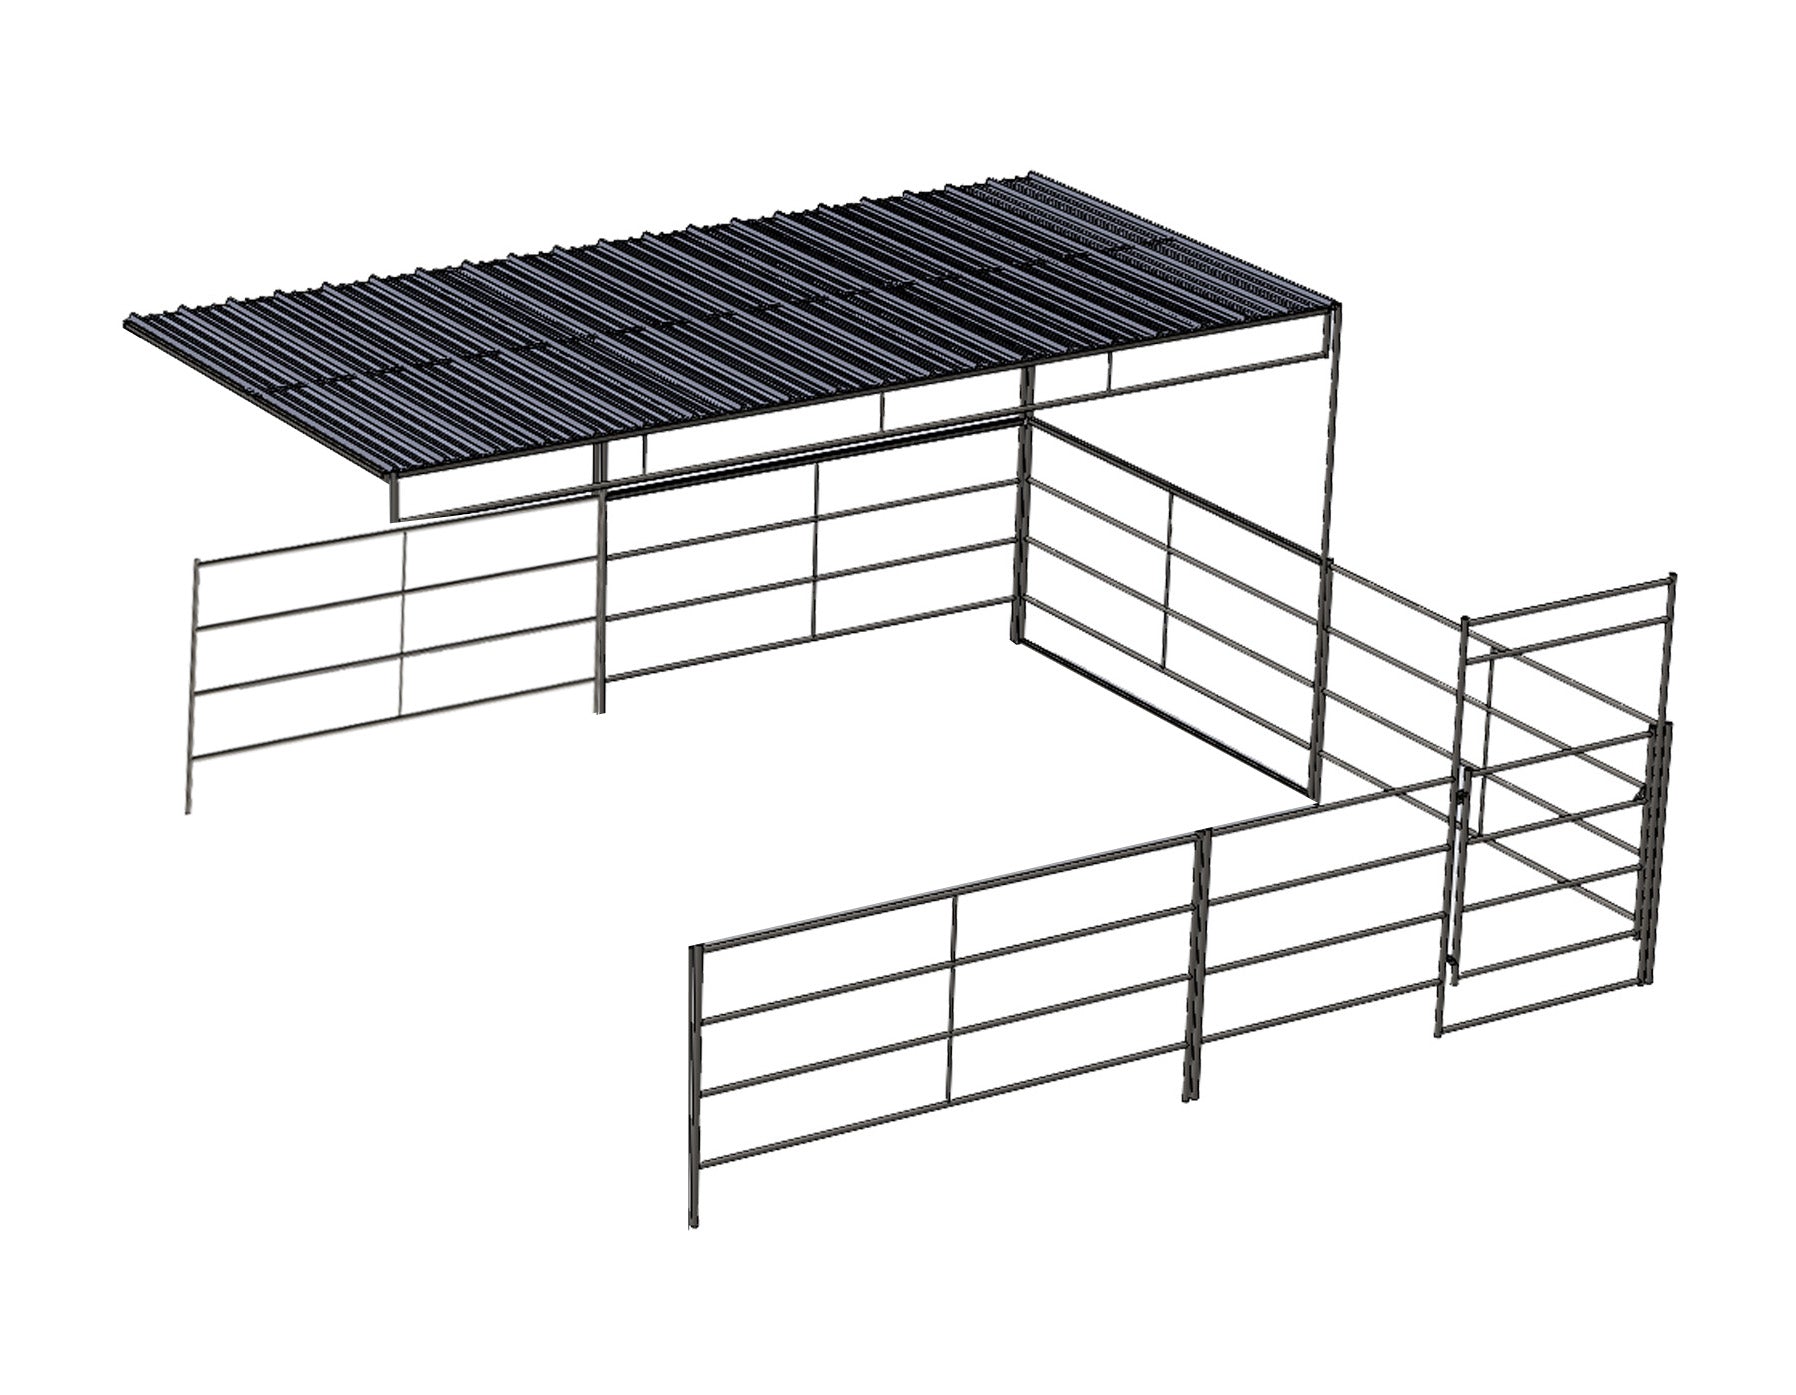 24 Ft X 24 Ft Add-On Stall with 12x24 Cover (4 Rail)